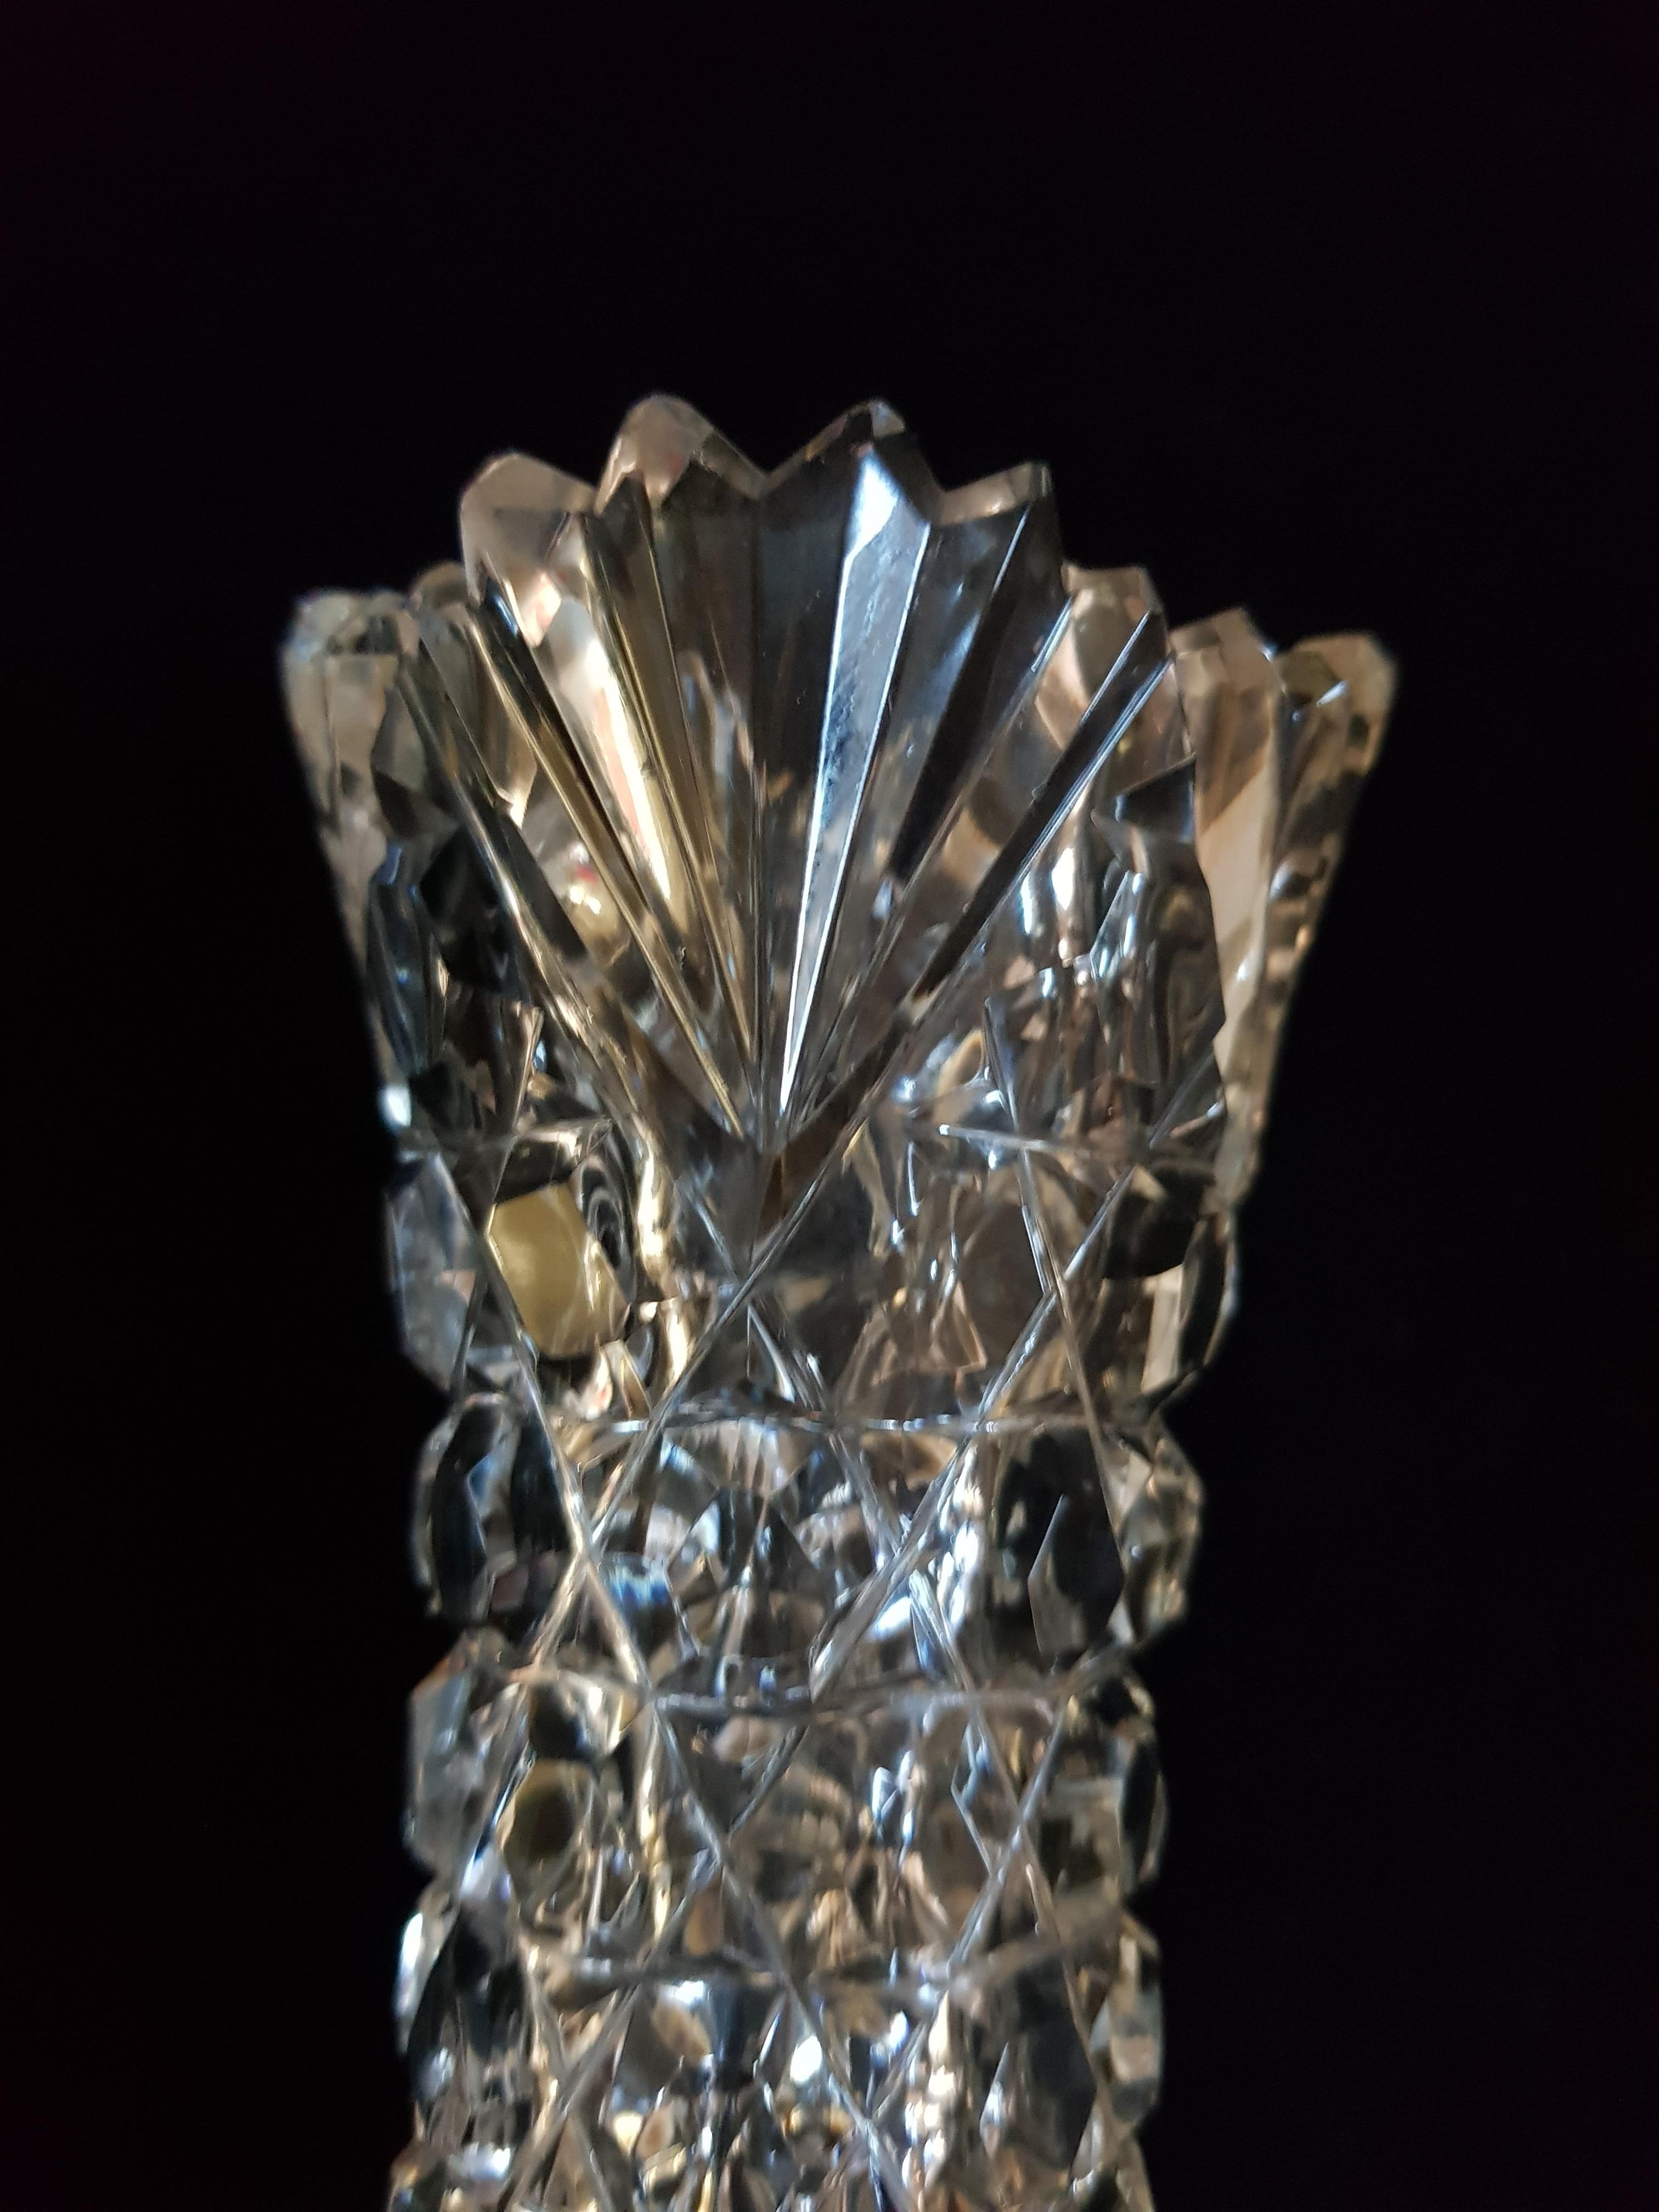 Hand-Crafted Vitange Bohemian Hand Cut Crystal Vases For Sale